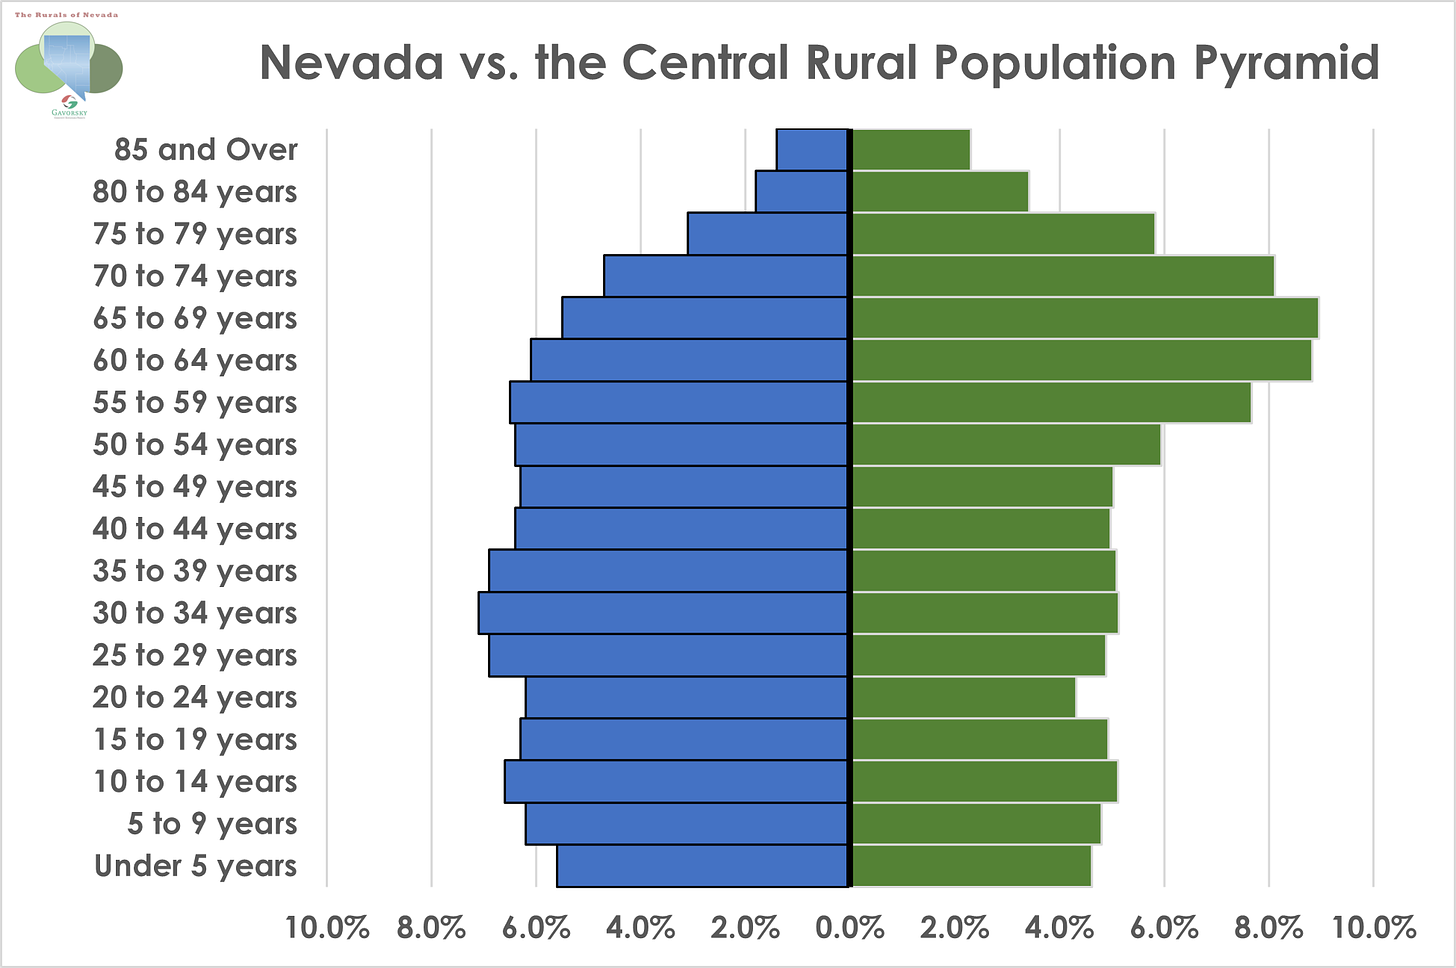 Population Pyramid graph comparing Nevada on left with the Central Rural region on right based on 2020 Census data. Details discussed in paragraph below.